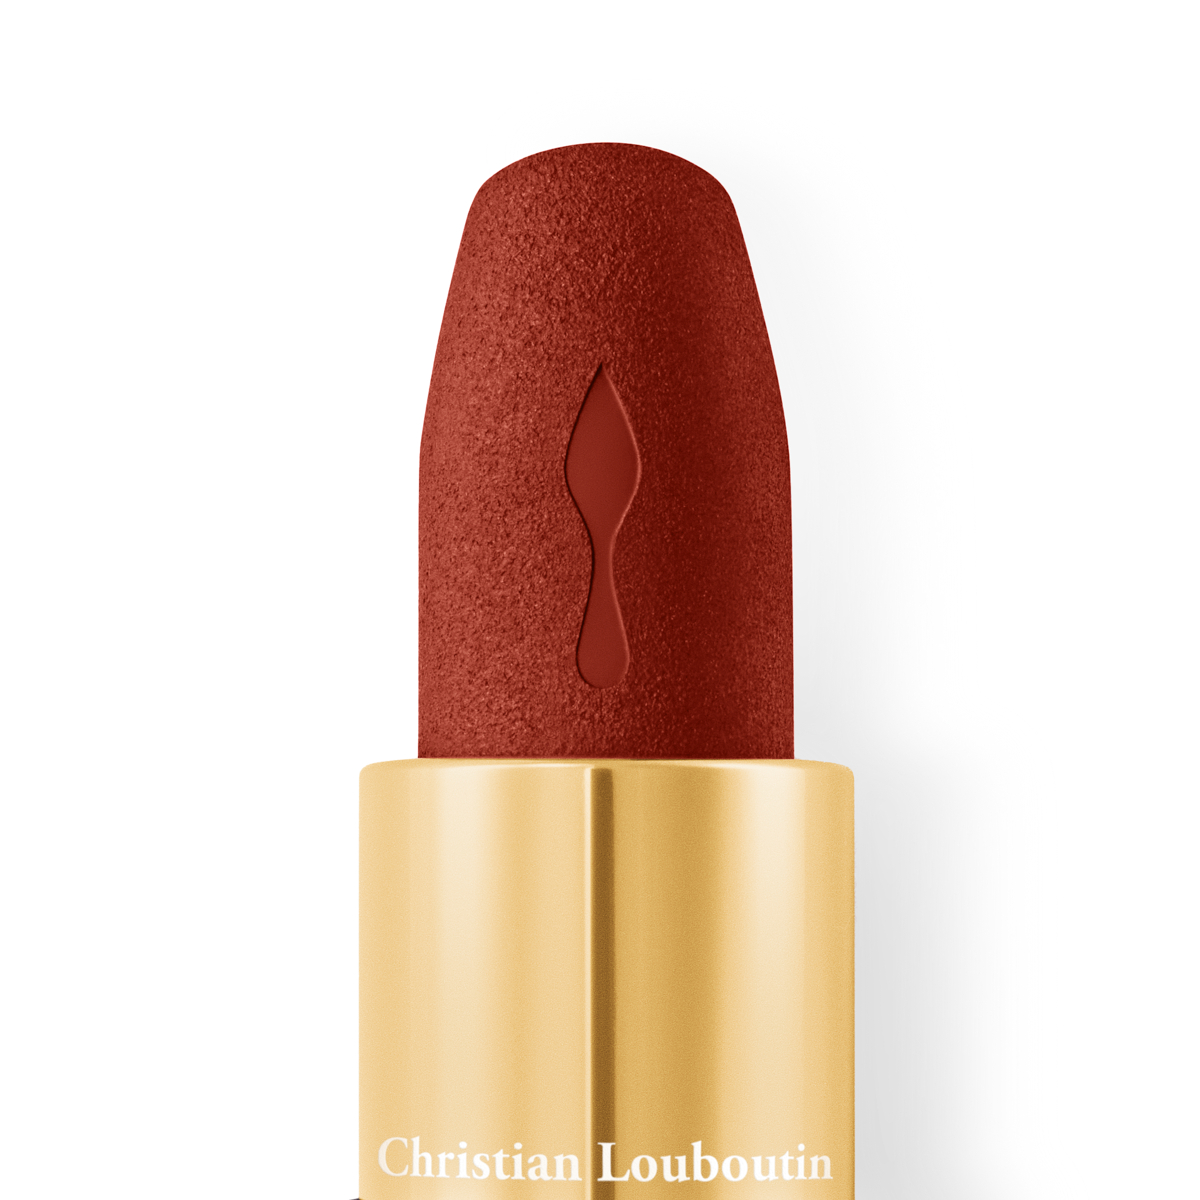 Christian Louboutin Beauty -- COMING SOON? - Page 157